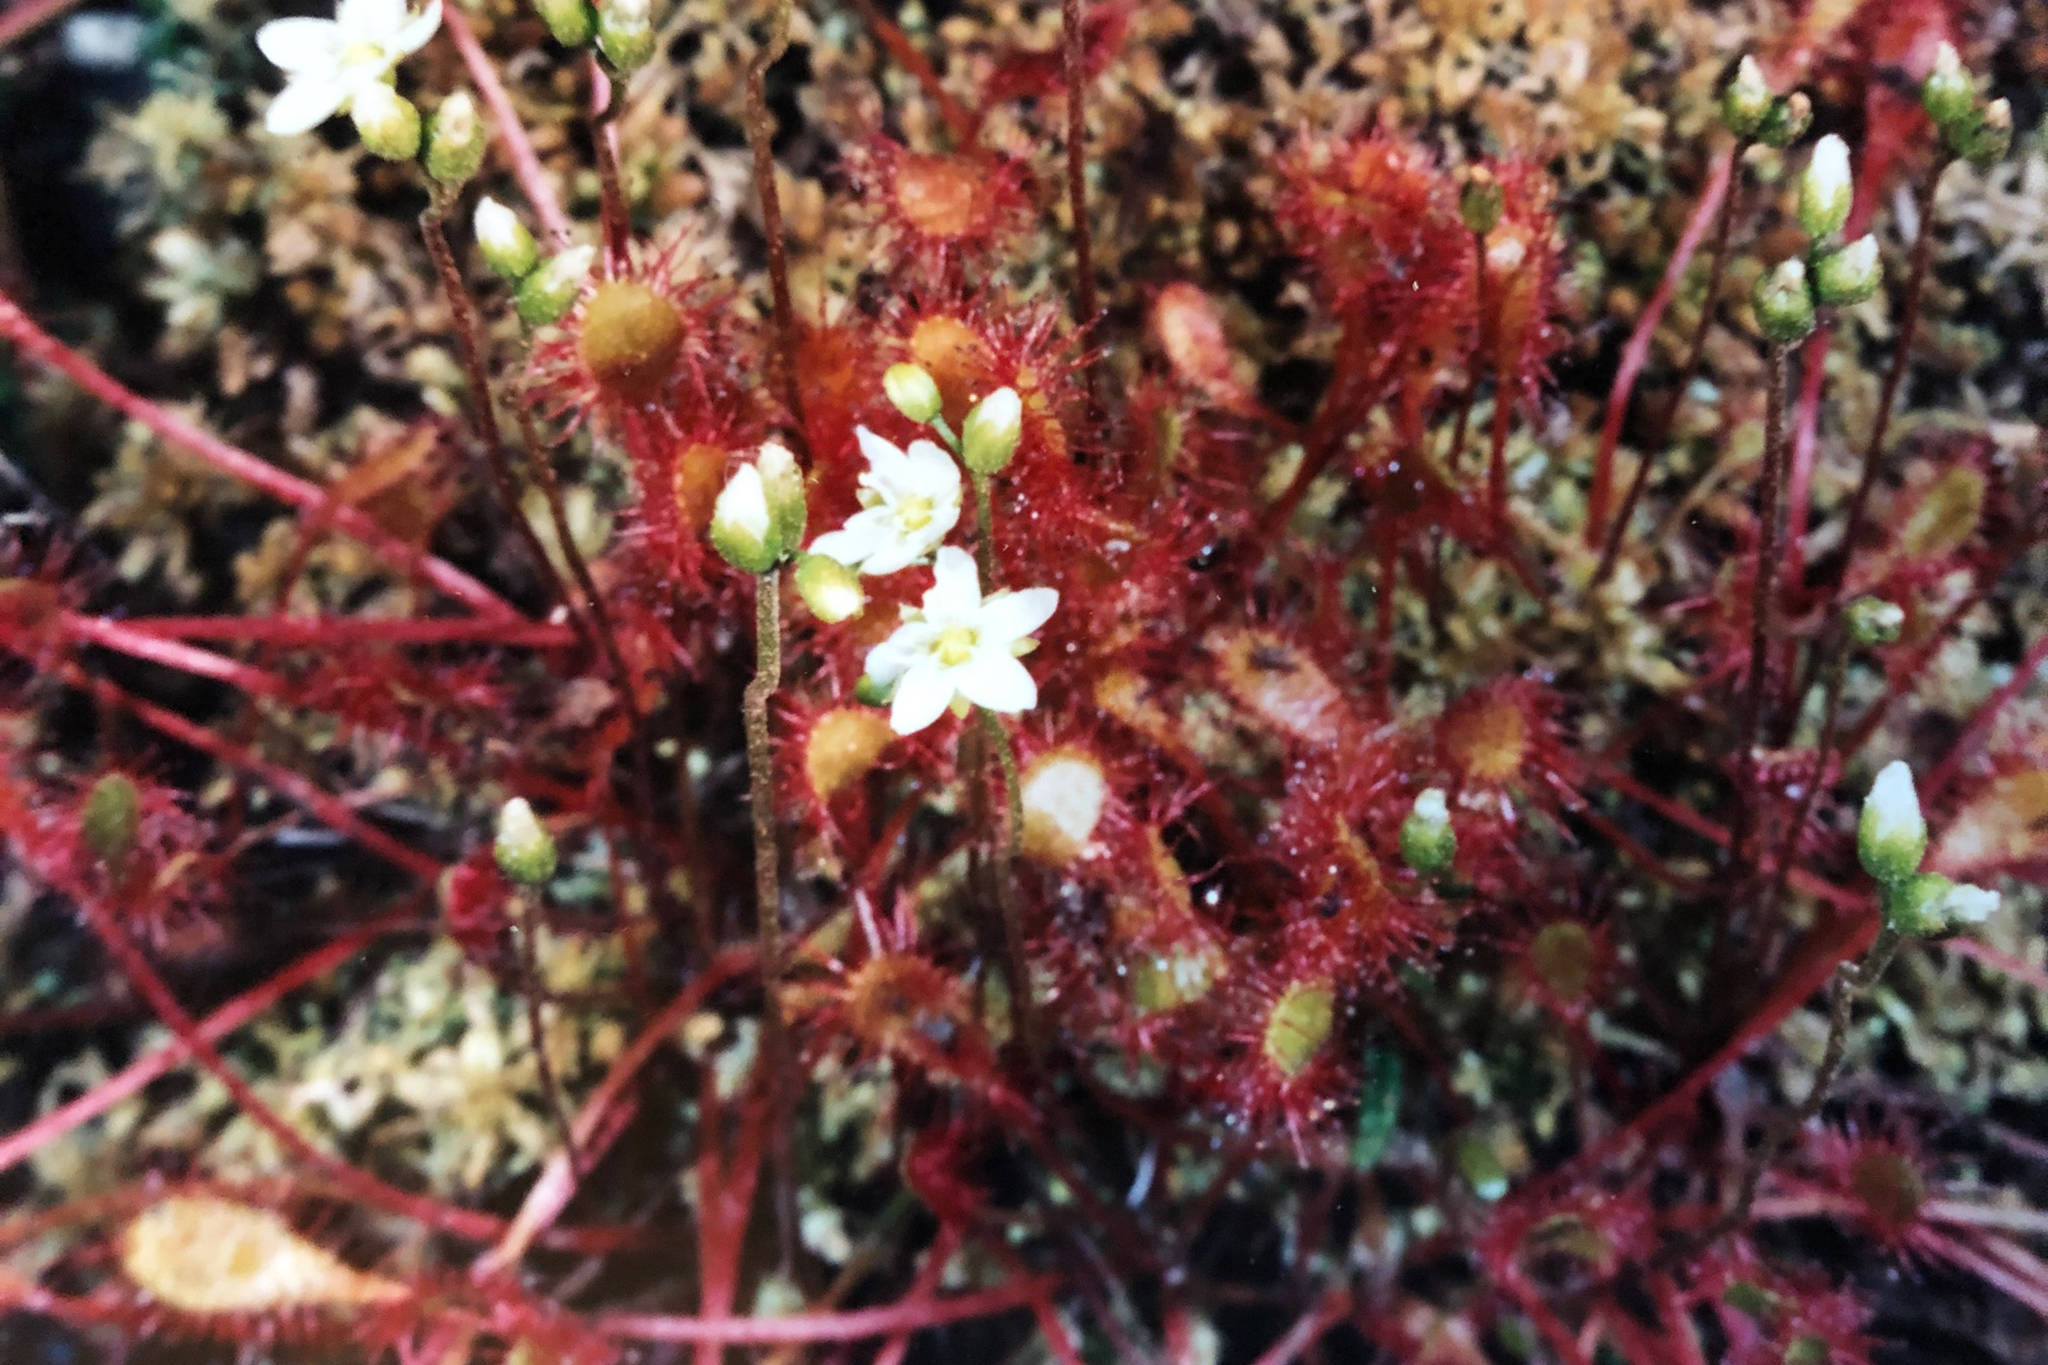 Drosera intermedia blooms at Eagle Crest in mid-October. (Courtesy Photo / Anthony Pope)